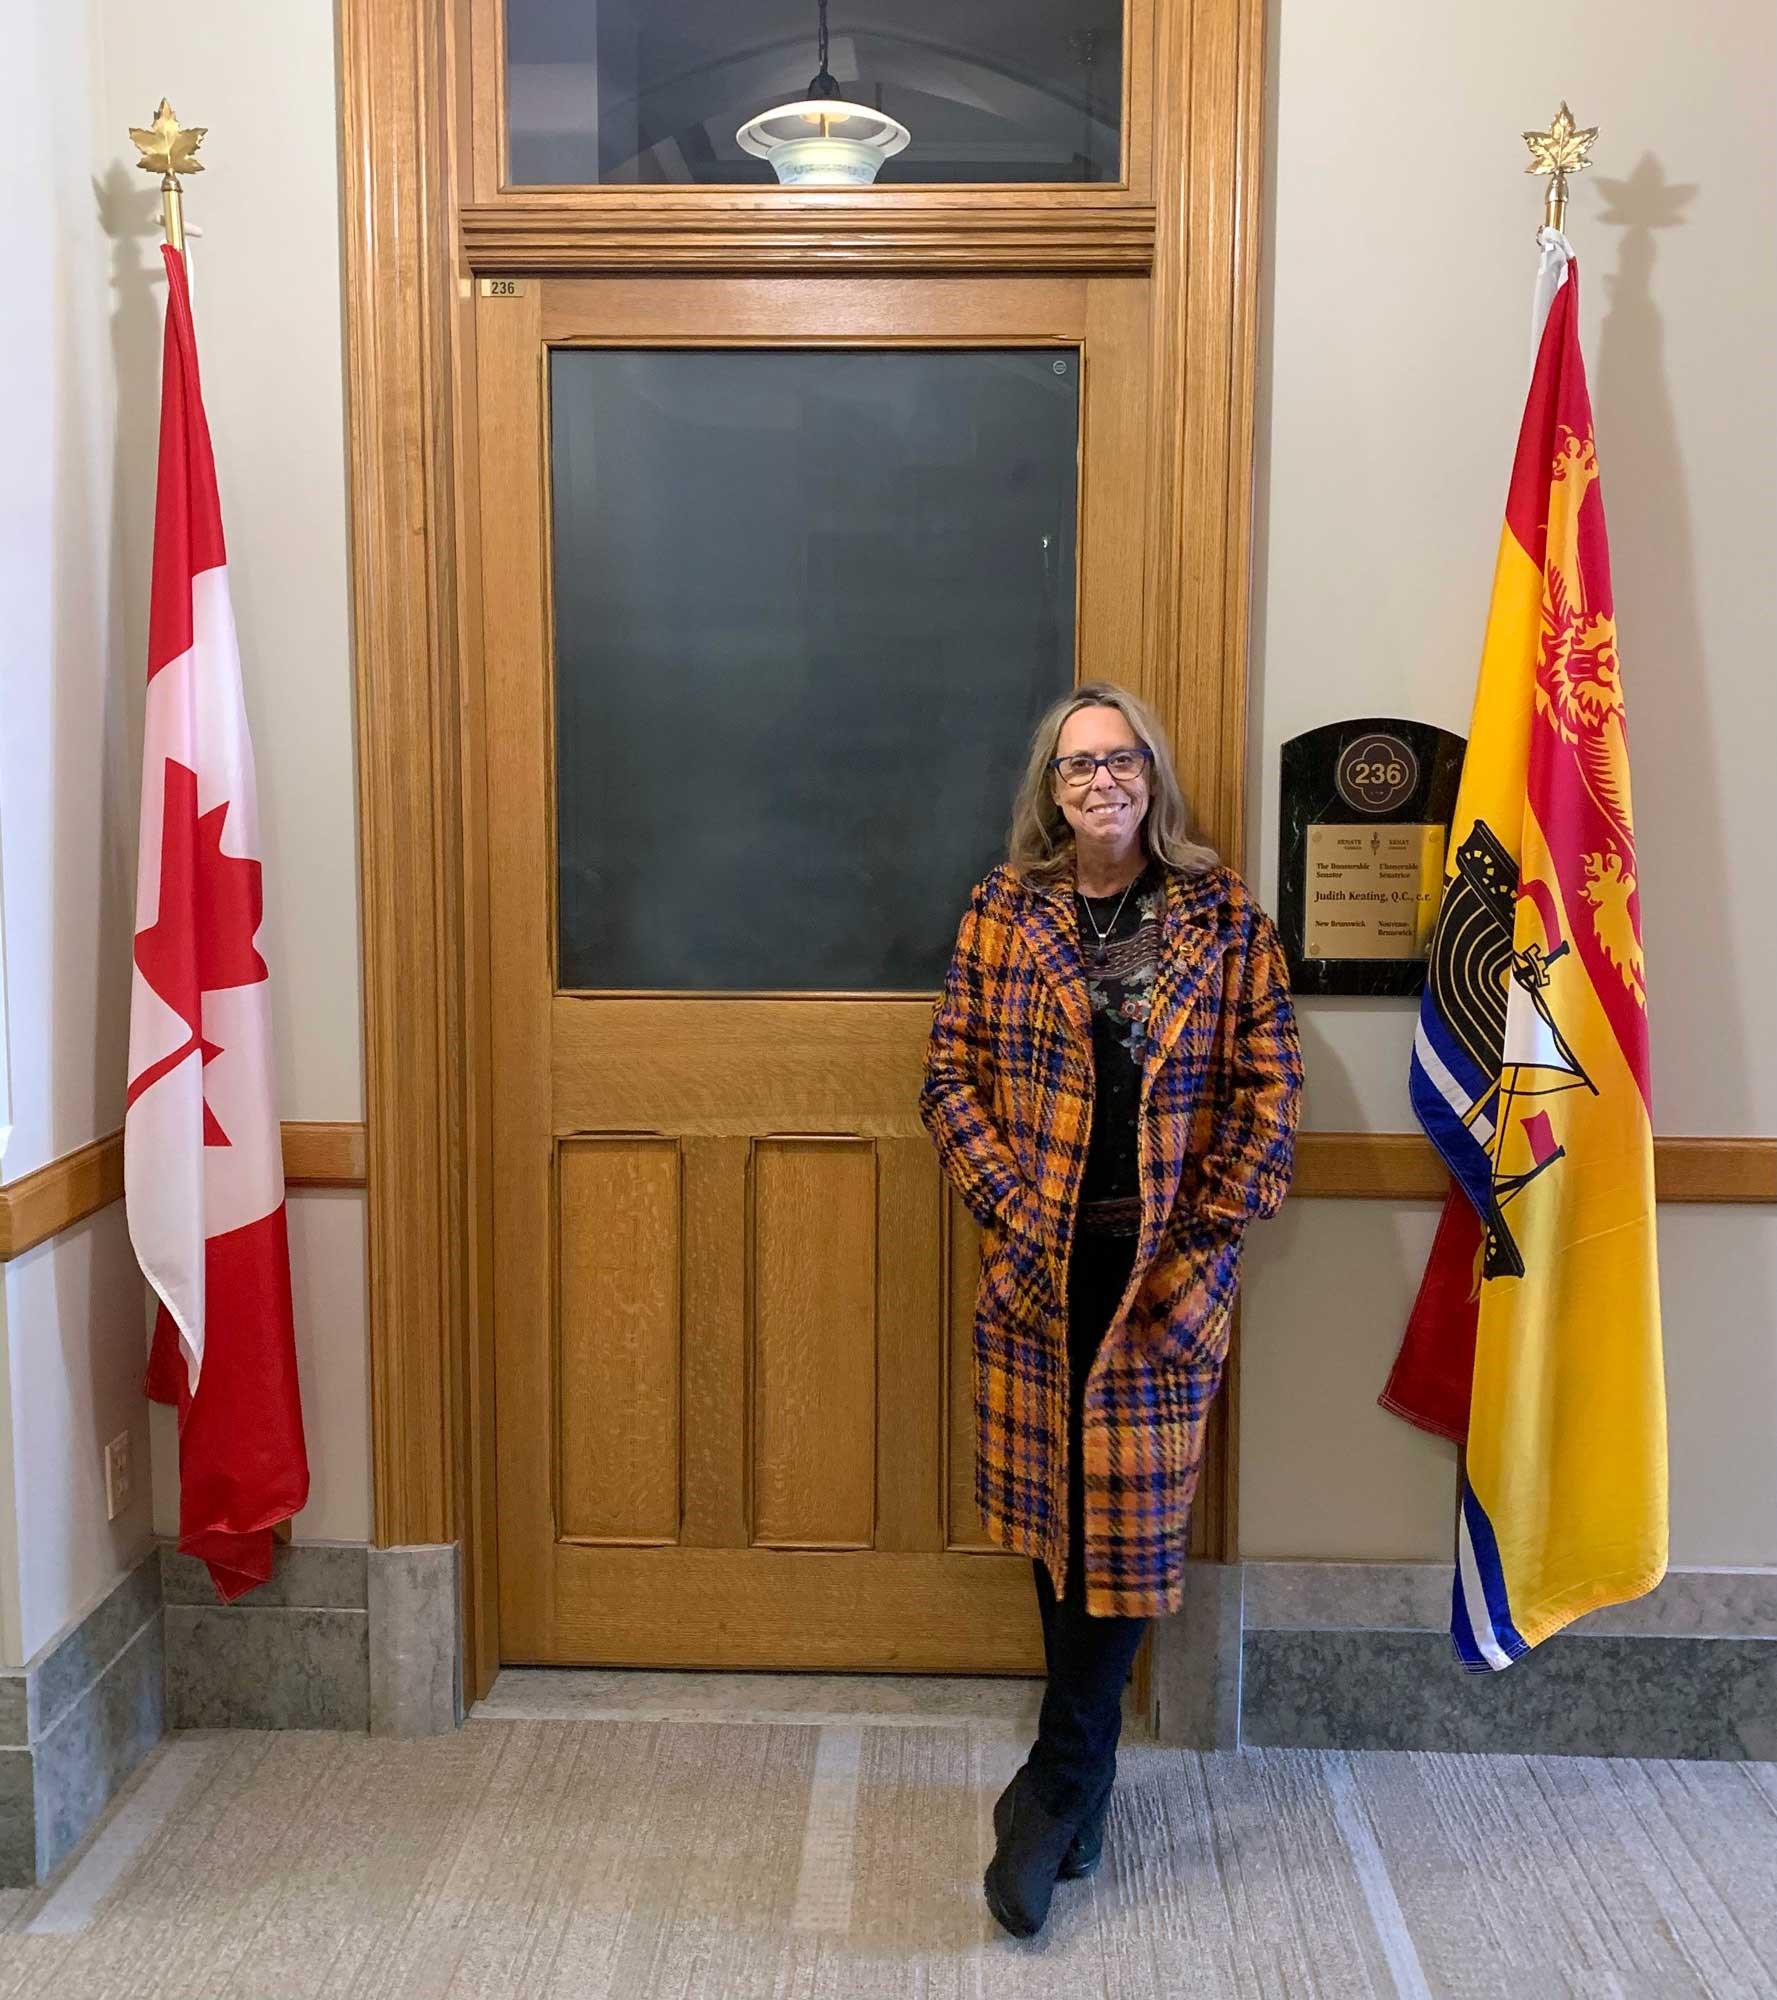 Senator Keating poses outside her Senate office, which was flanked by the flags of Canada and New Brunswick, the province she represented in the Upper Chamber. (Photo credit: Office of the late Senator Keating)